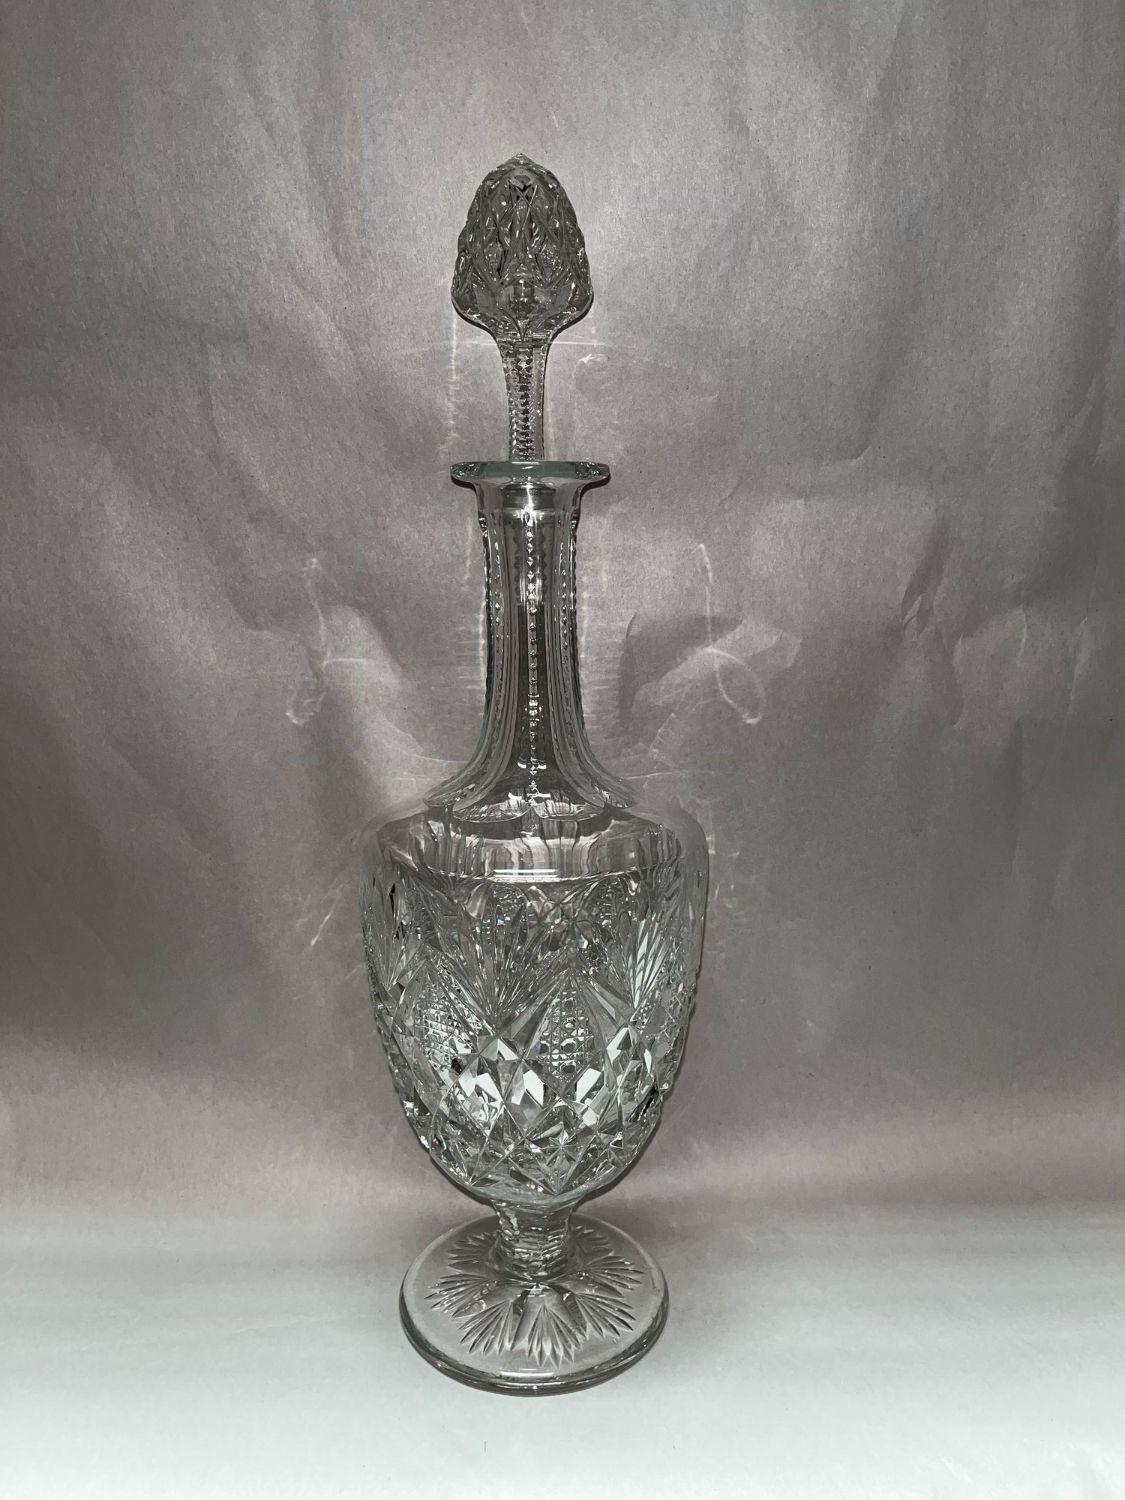 French St. Louis wine decanter. Stamped.
Made in France.